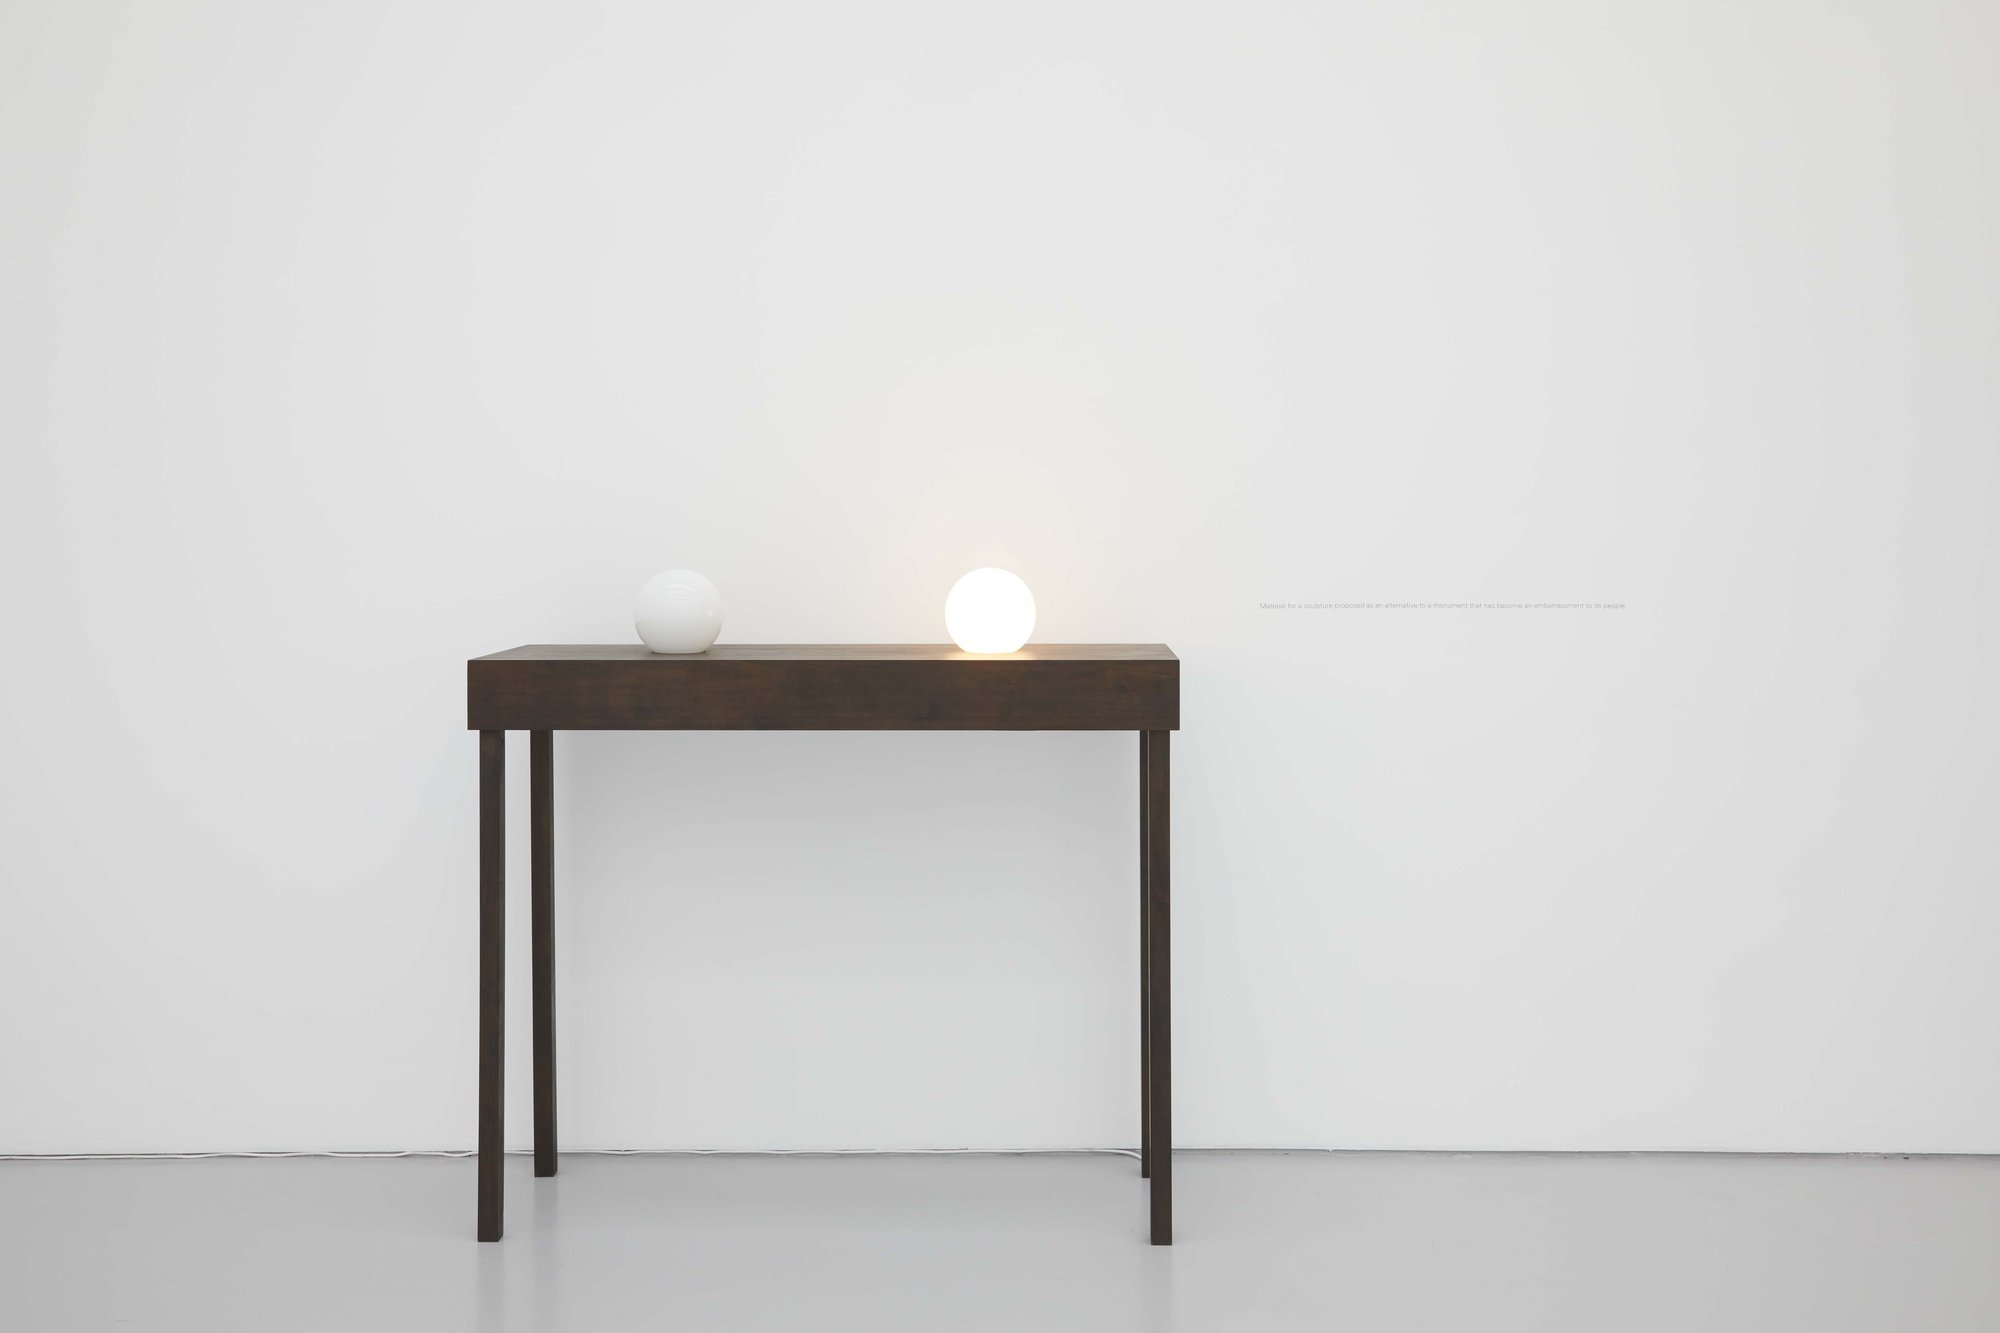 Iman Issa, Material for a sculpture proposed as an alternative to a monument that has become an embarrassment to its people, two light blubs, dark walnut plywood table, vinyl text on wall, 150 x 120 x 50 cm (59 x 47 1/4 x 19 2/3 in), 2010